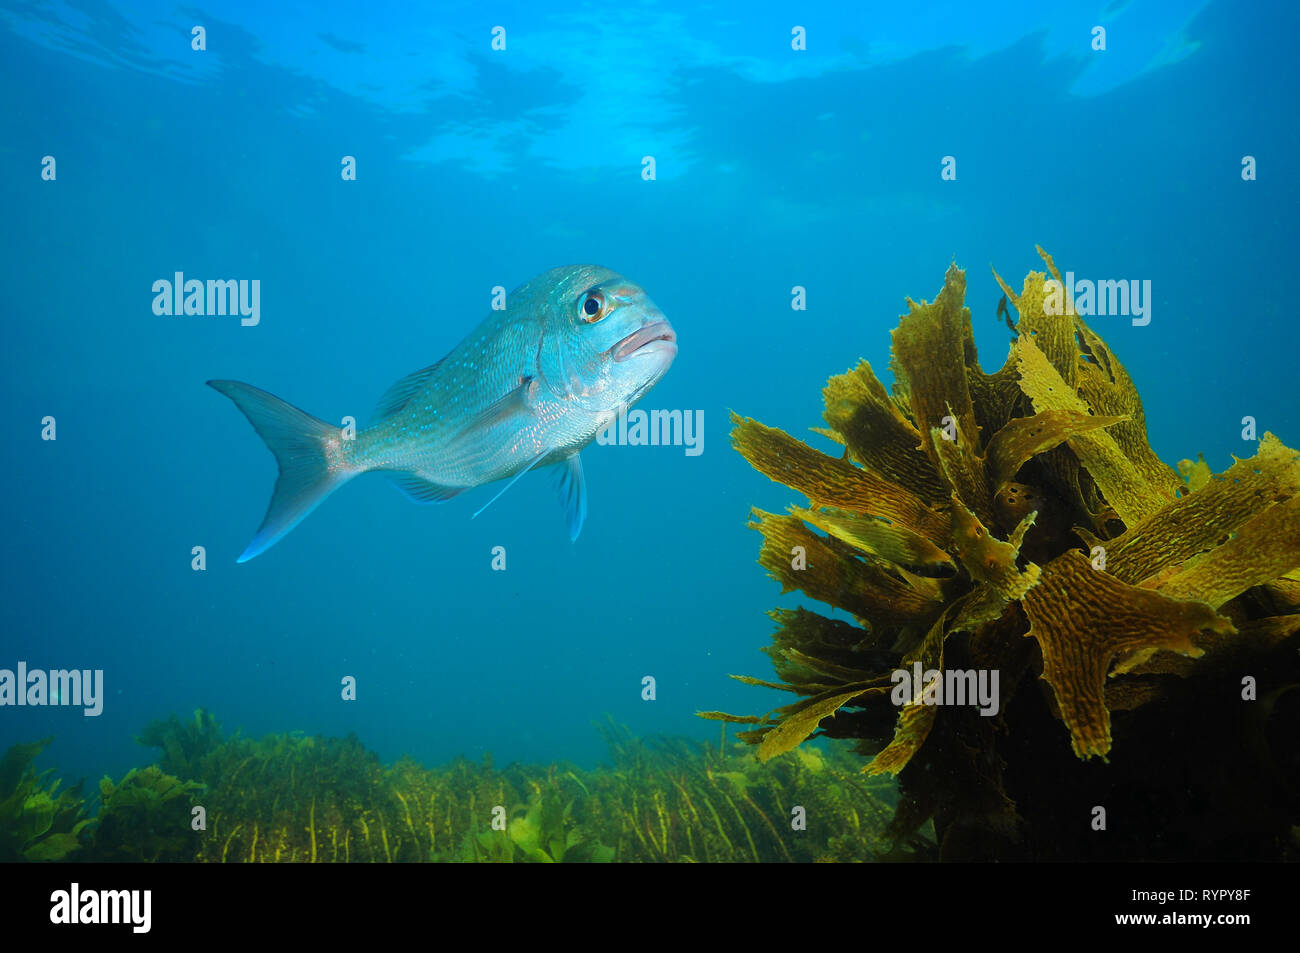 Adult Australasian snapper Pagrus auratus swimming above fields of seaweeds in blue ocean. Stock Photo